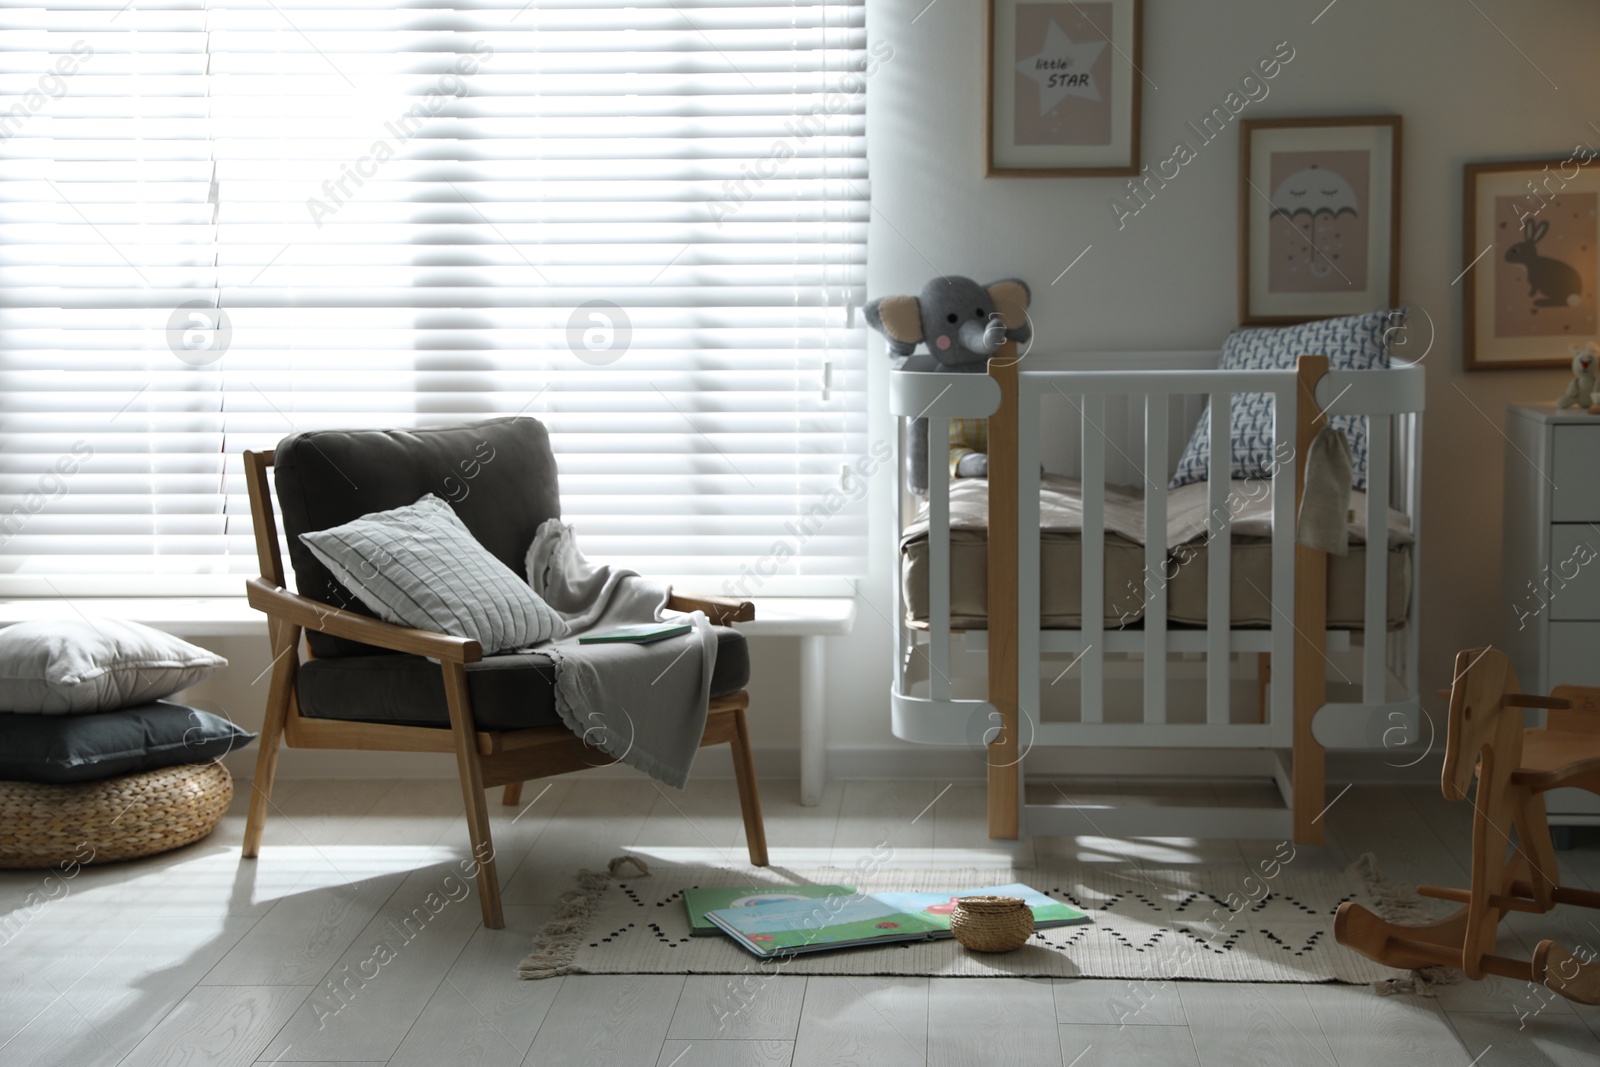 Photo of Baby room interior with crib and armchair. Idea for design